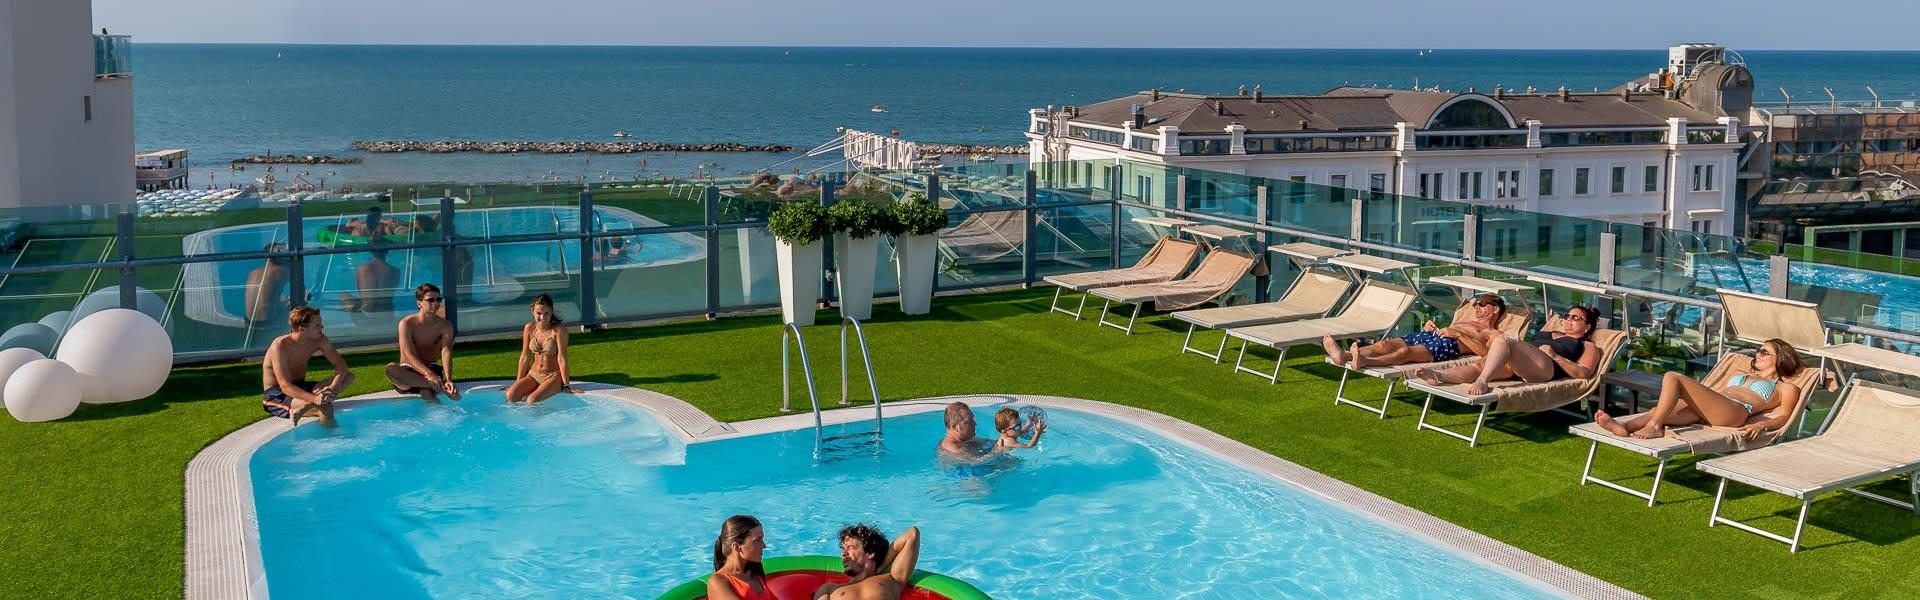 hotelsanmarcocattolica en special-offer-upgrade-to-deluxe-rooms-in-hotel-by-the-sea-in-cattolica 003